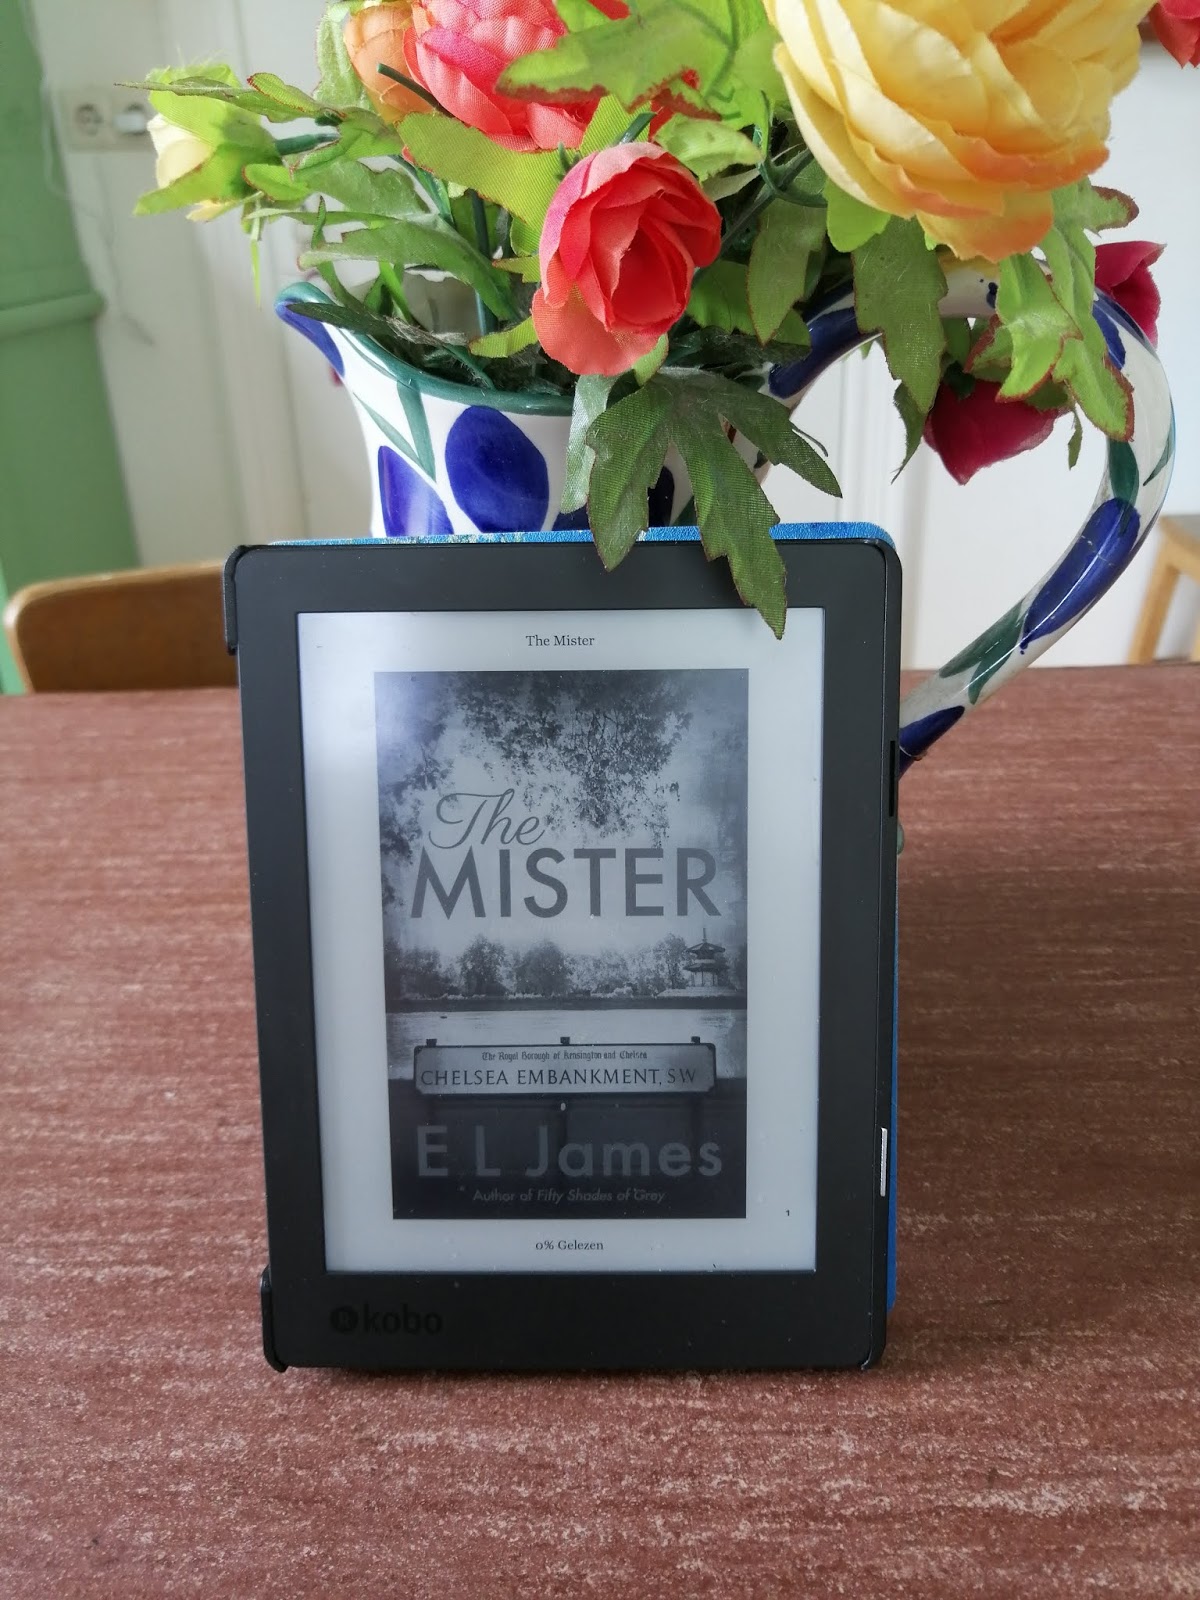 The Mister by E.L. James